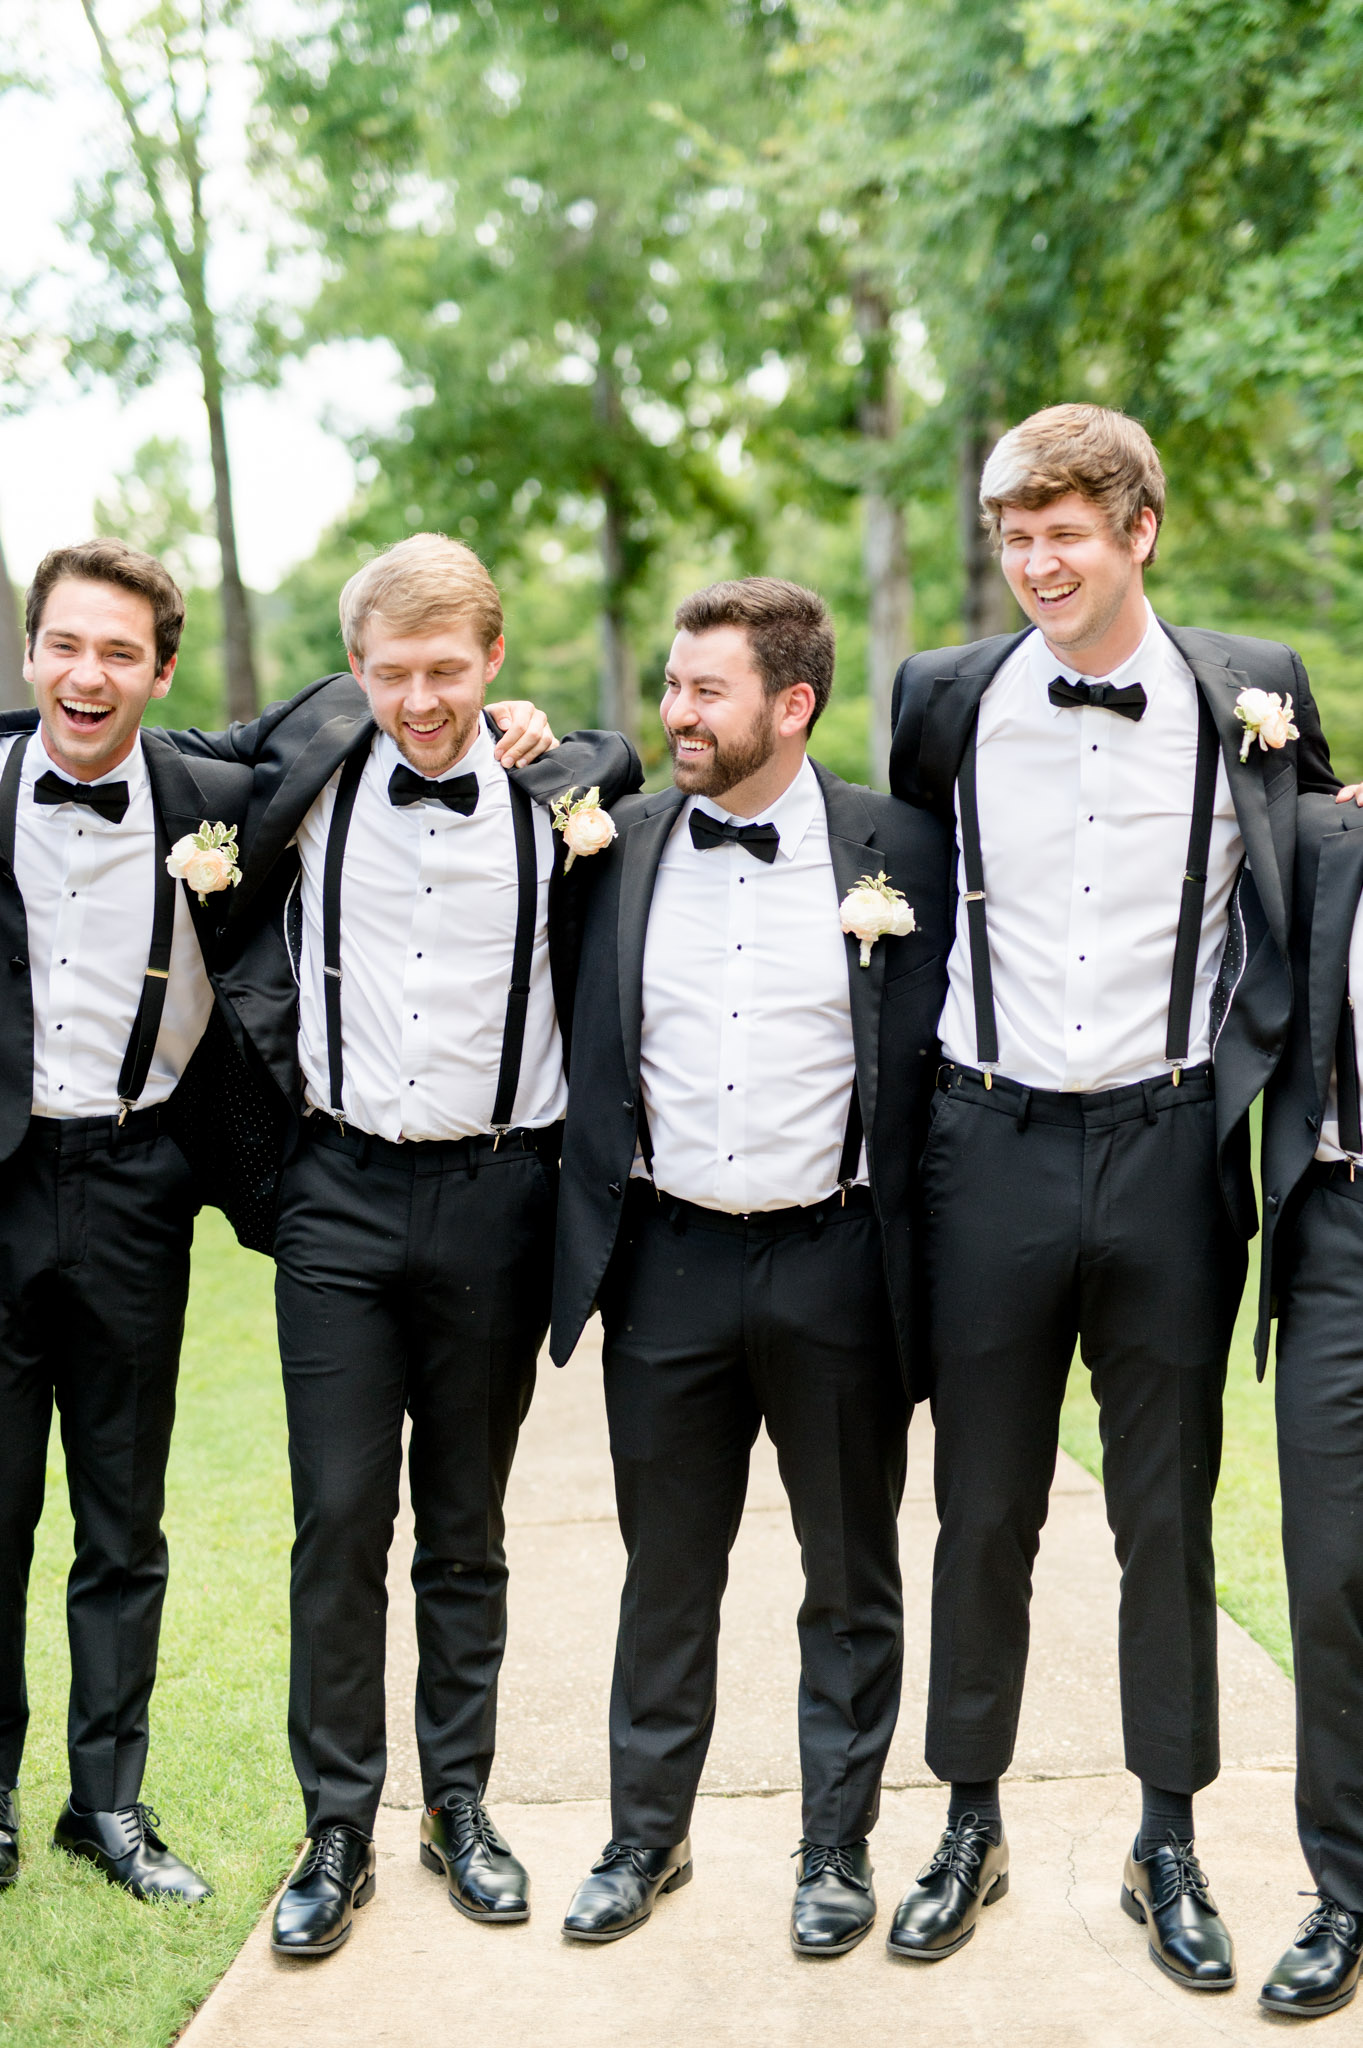 Groom puts arms over groomsmen and smiles.